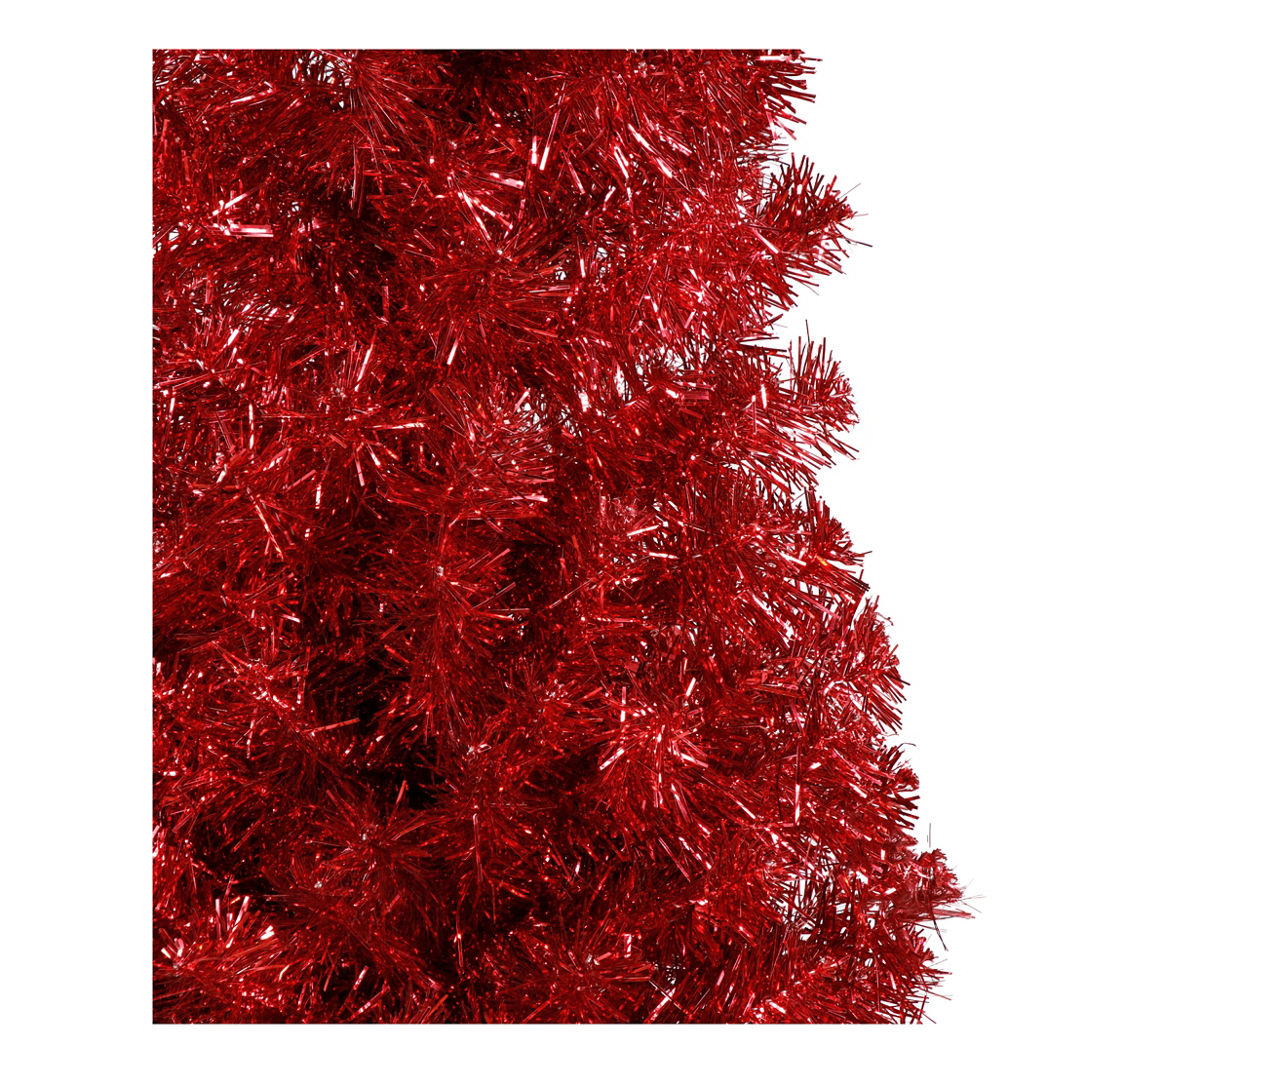 Northlight Holographic Brown Slim Artificial Tinsel Unlit 4 Foot Christmas  Tree, Color: Brown - JCPenney